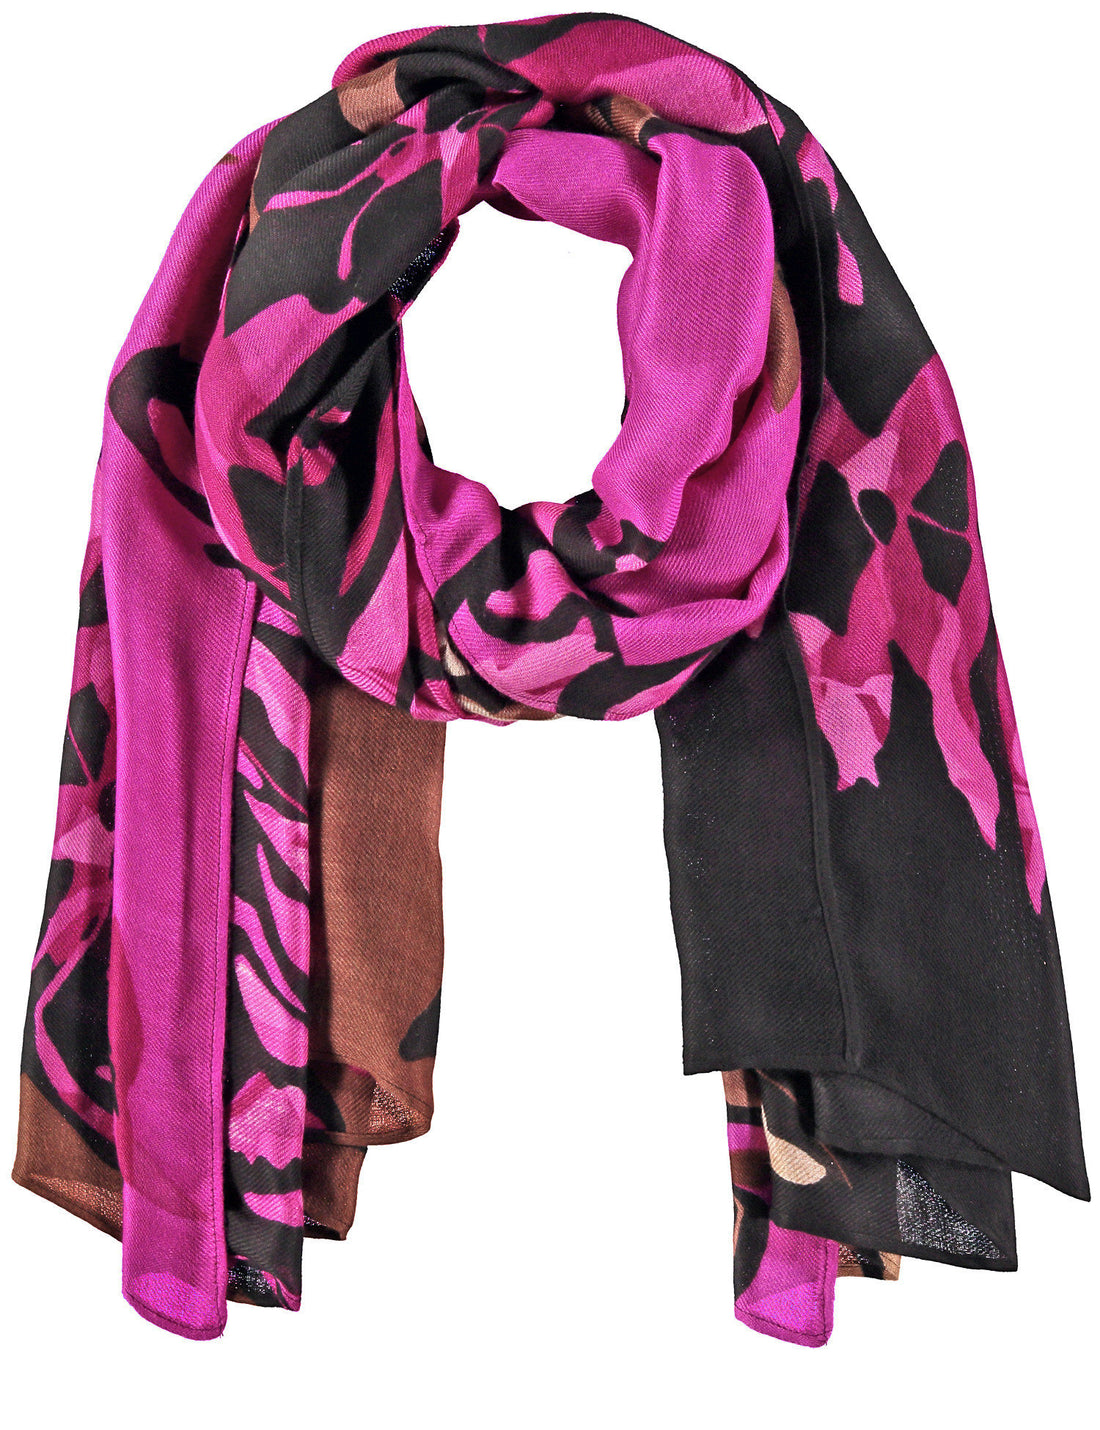 Lightweight Scarf With A Print_300202-23301_3392_02